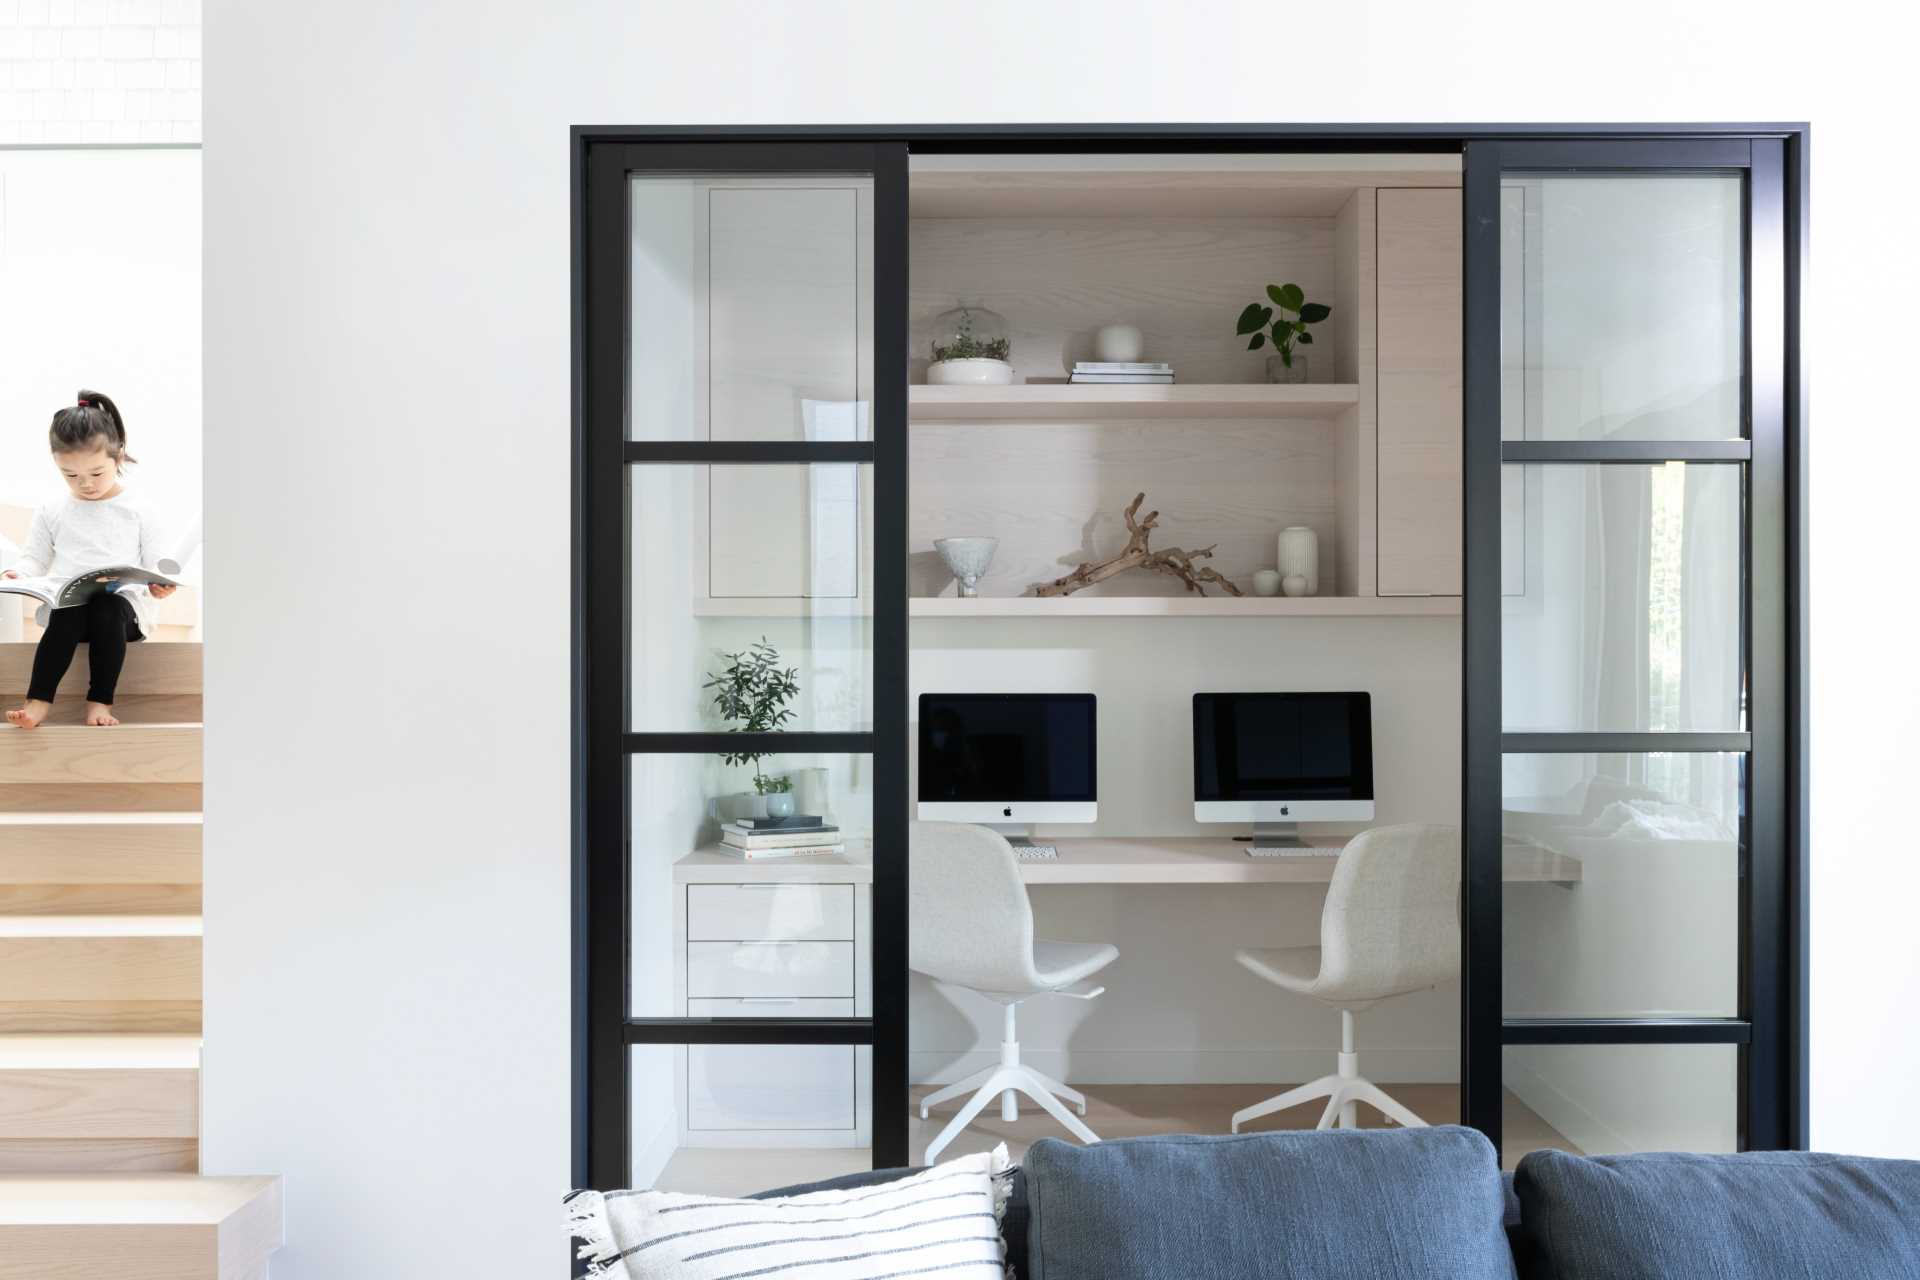 A small home office for two with wood shelving, cabinets, and a desk with drawers.